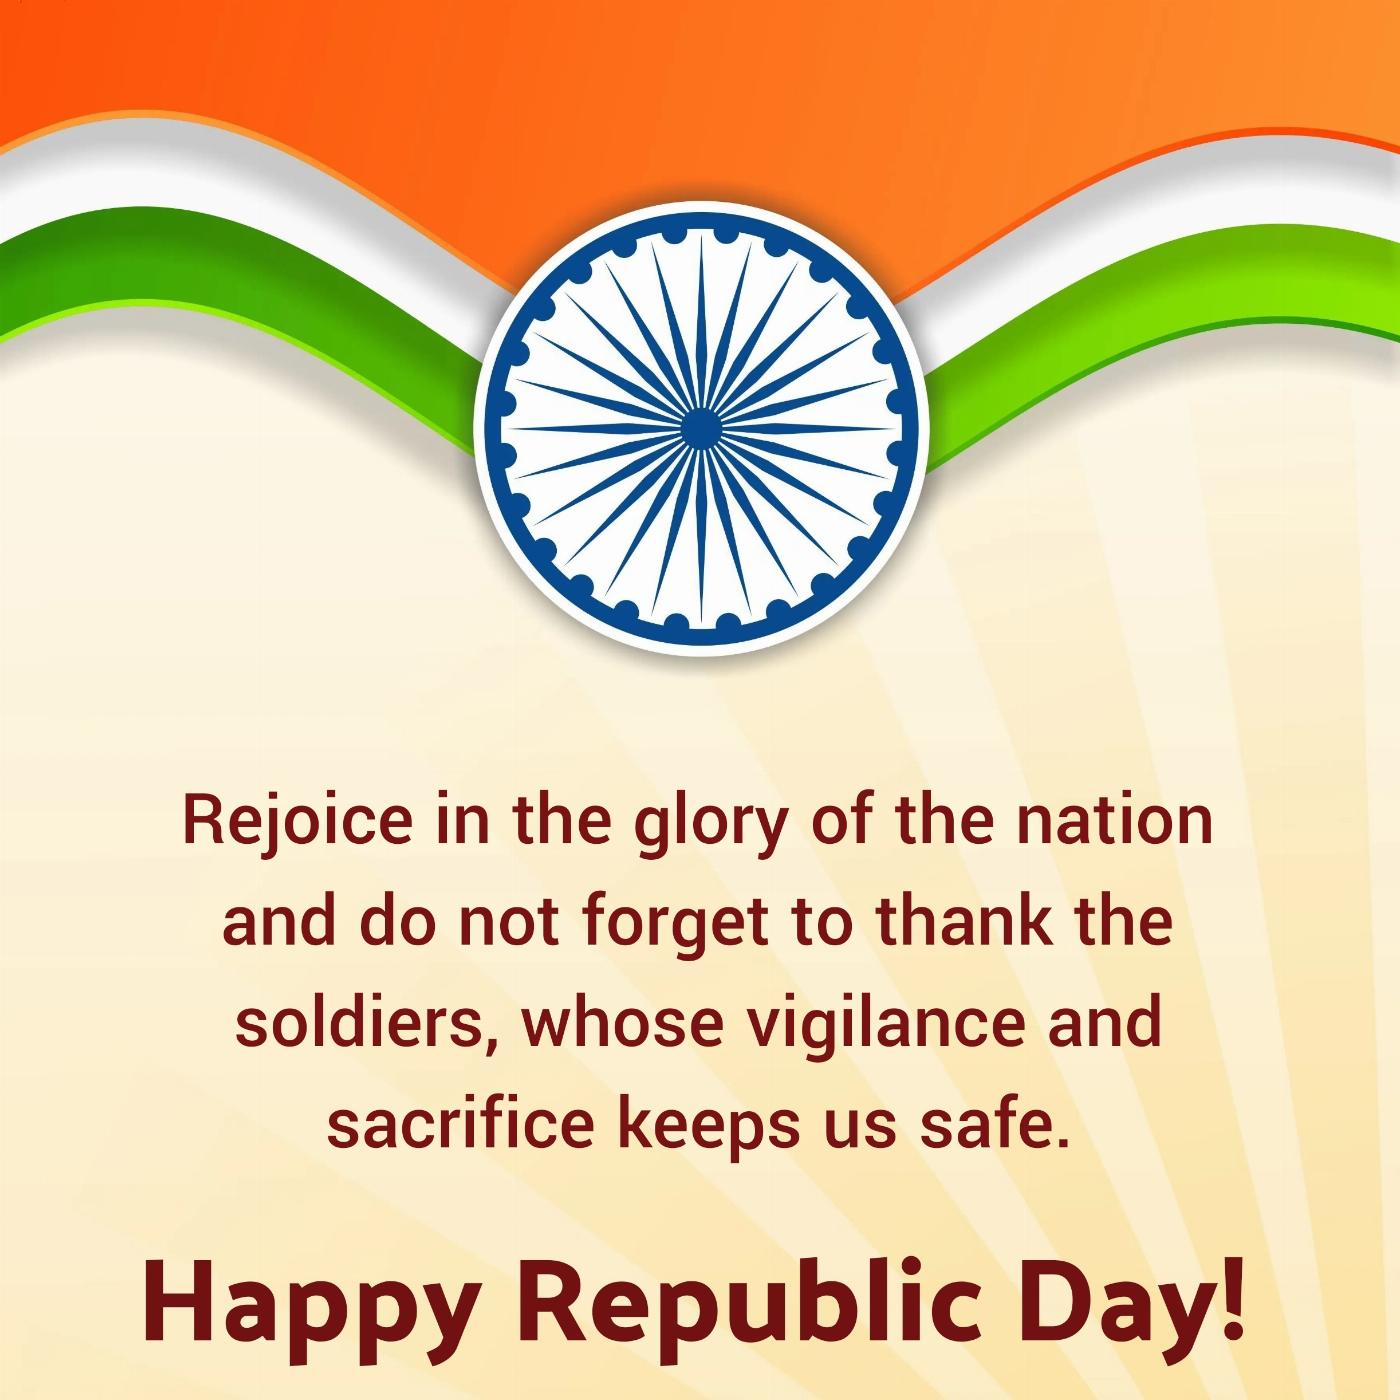 Rejoice in the glory of the nation and do not forget